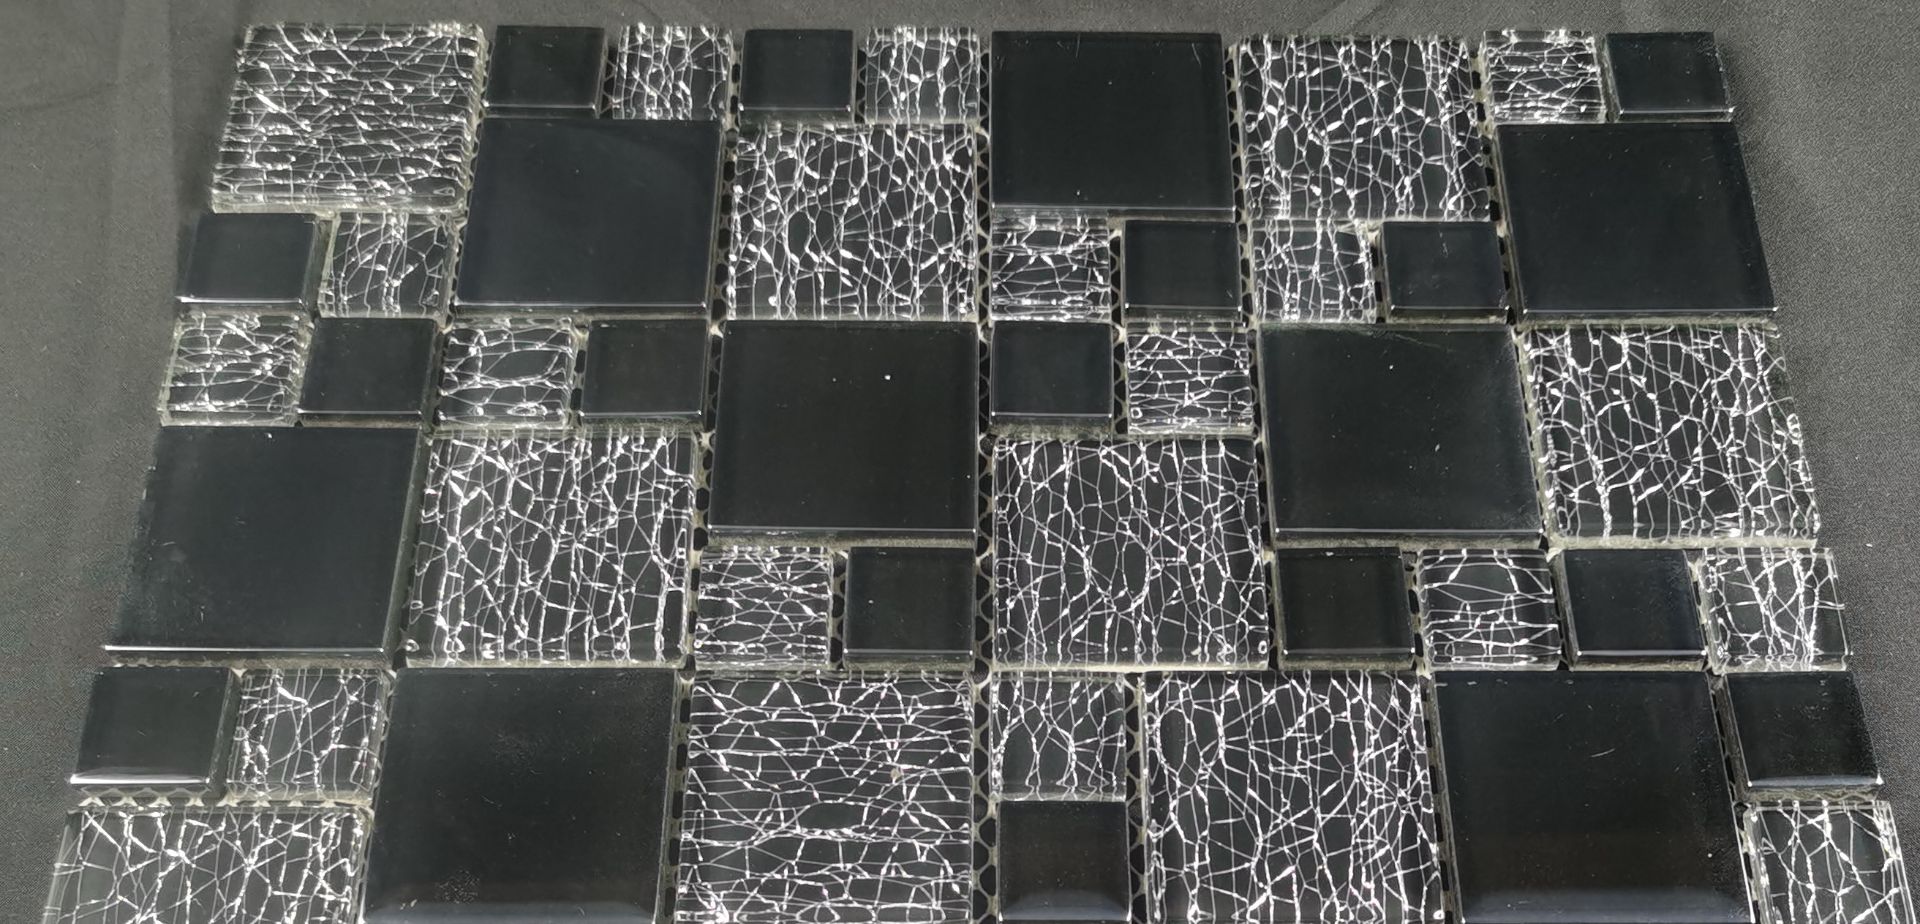 5 Square Metres - High Quality Glass/Stainless Steel Mosaic Tiles-55 sheets - Image 5 of 5